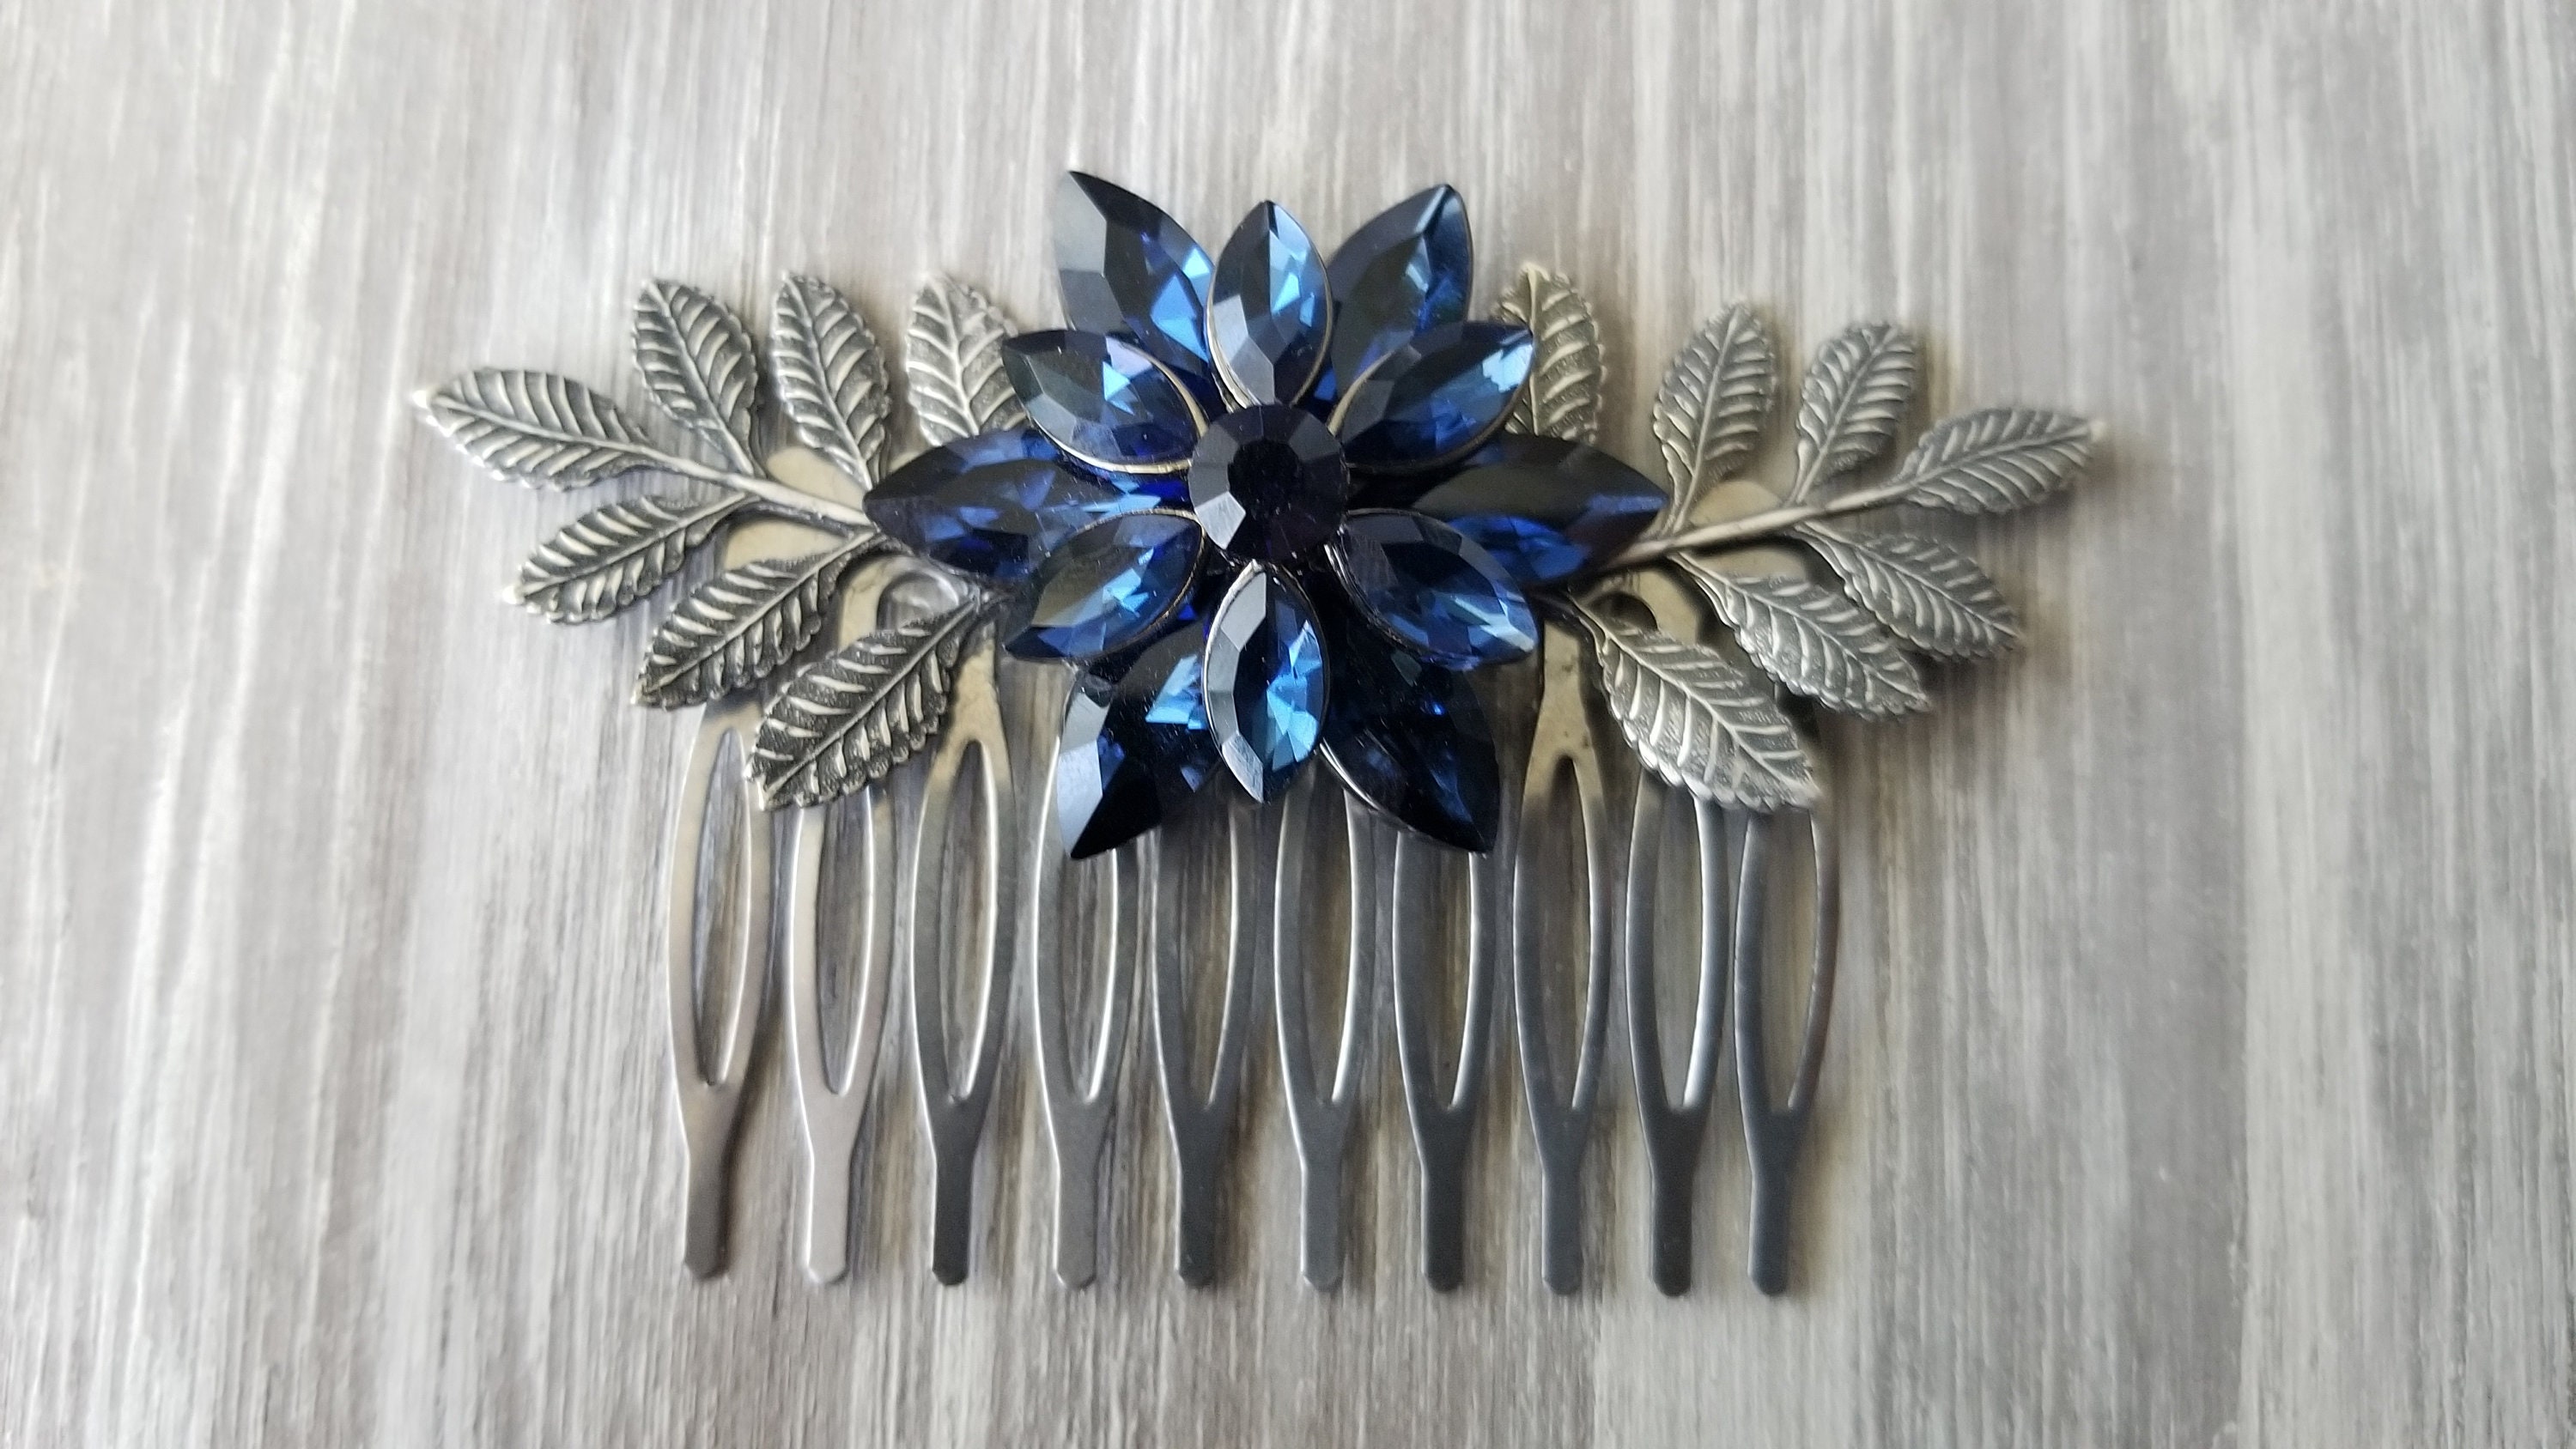 Materials for Creating Jewelry. Navy Blue Rhinestones, Hair Combs, Metal  Flowers on a Paper Background Stock Photo - Image of design, creativity:  194059696